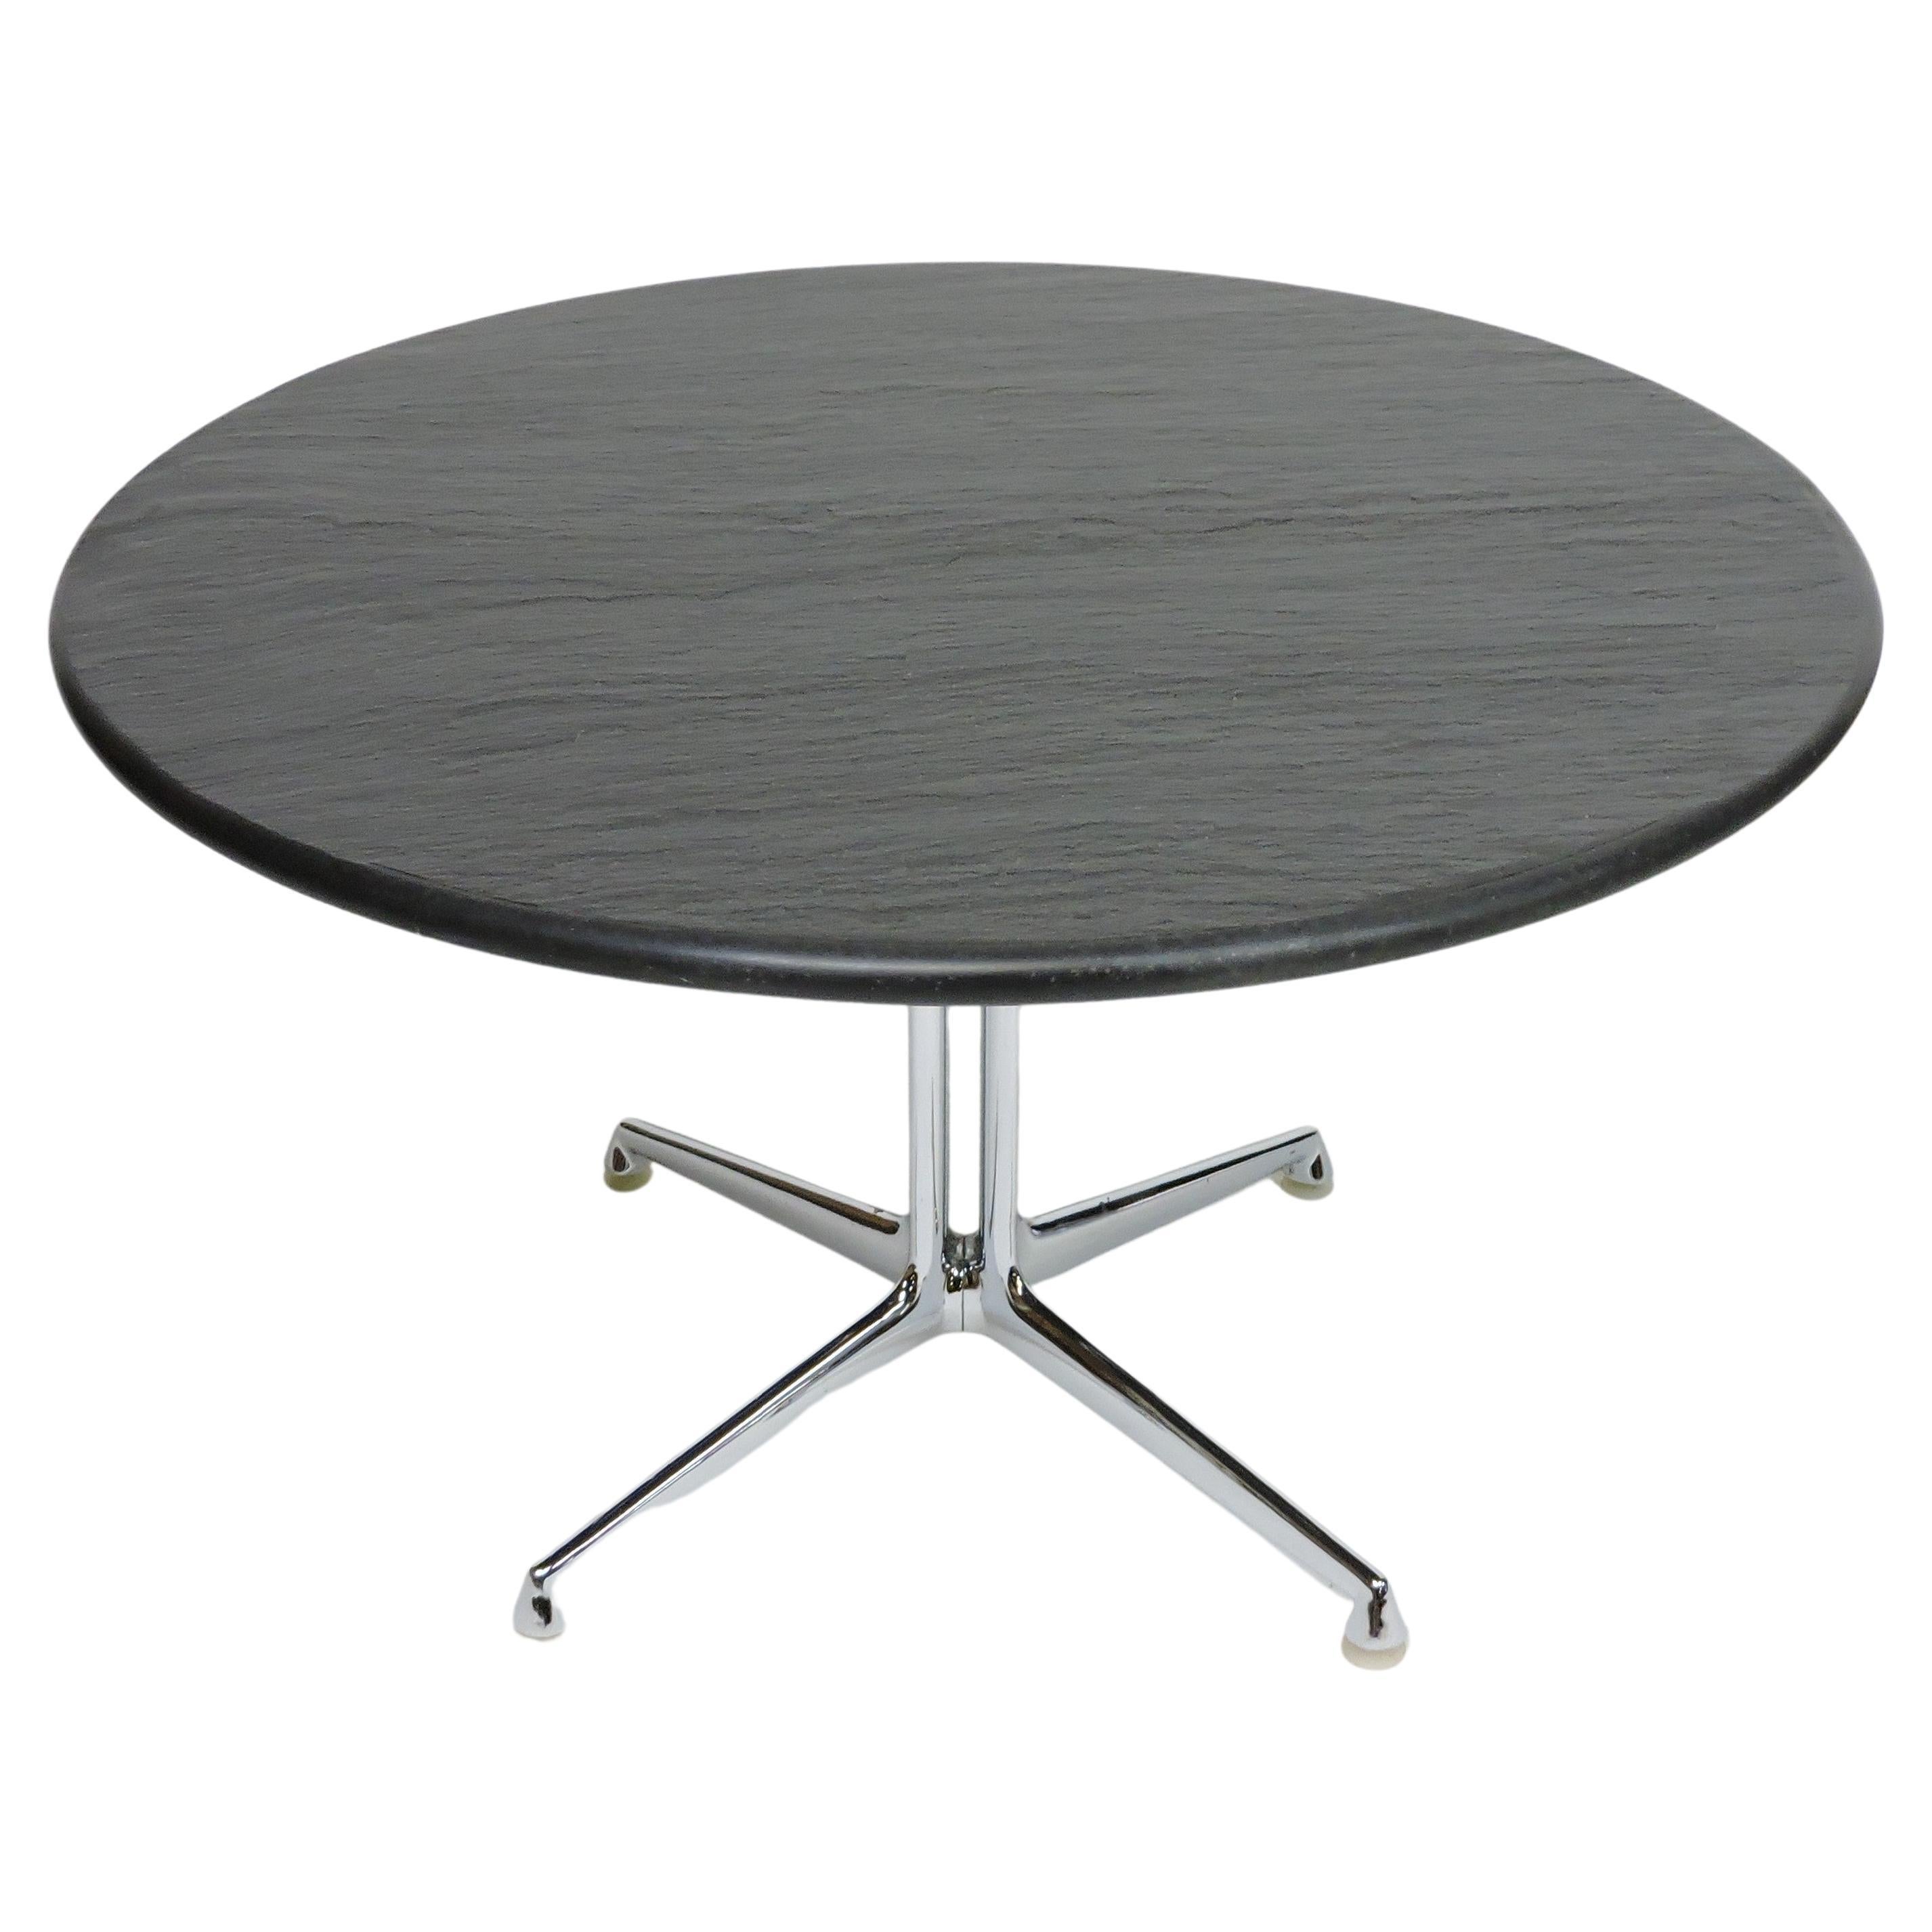 Eames La Fonda Slate Top Coffee or End Table for Herman Miller, 2 Available